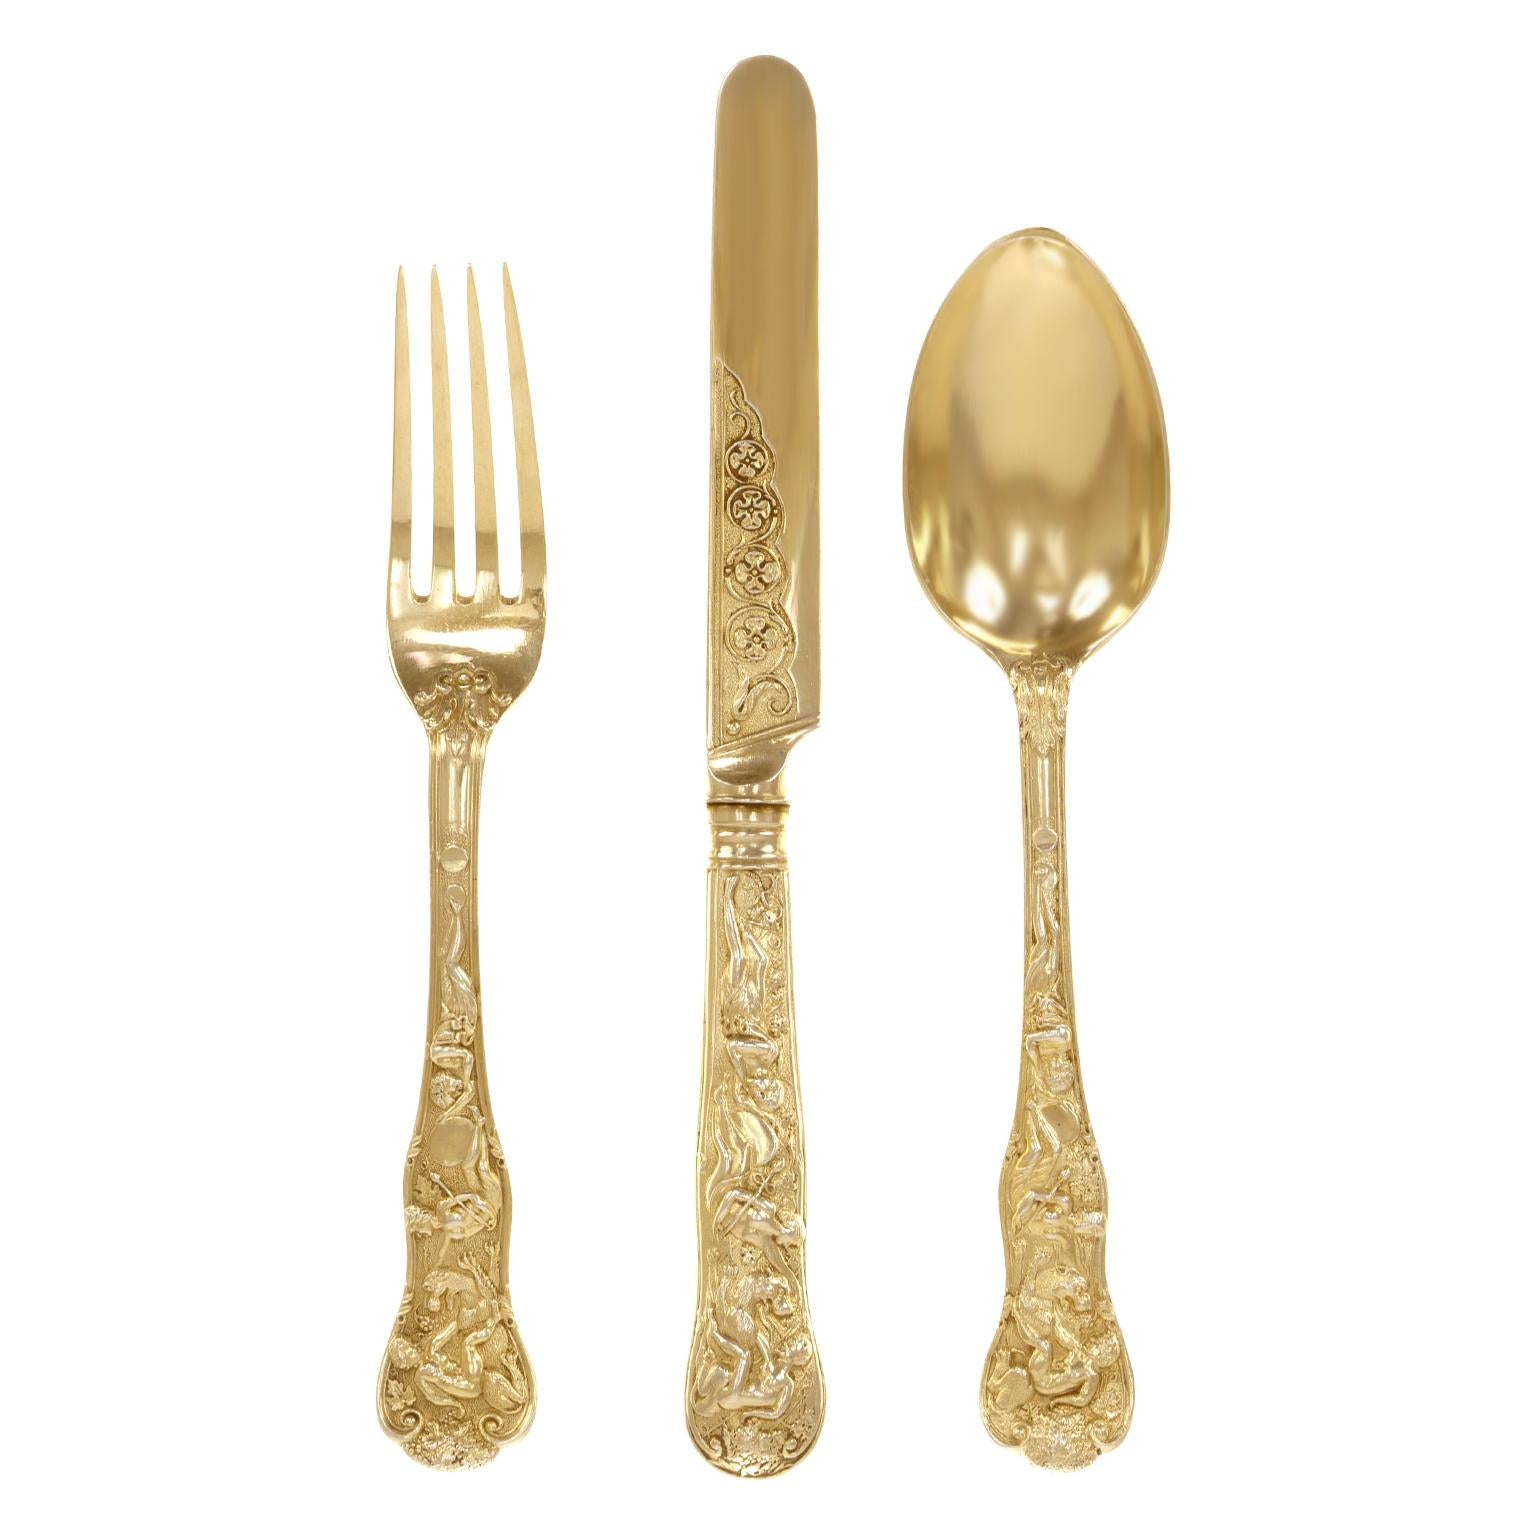 Circa 1898, Gilded Sterling, by James Wakely & Frank Clarke Wheeler, London, England.  This spectacular Sterling Gilt canteen or set for 18 in the Bacchanalian pattern is widely considered to be the most desirable and rarest British flatware ever